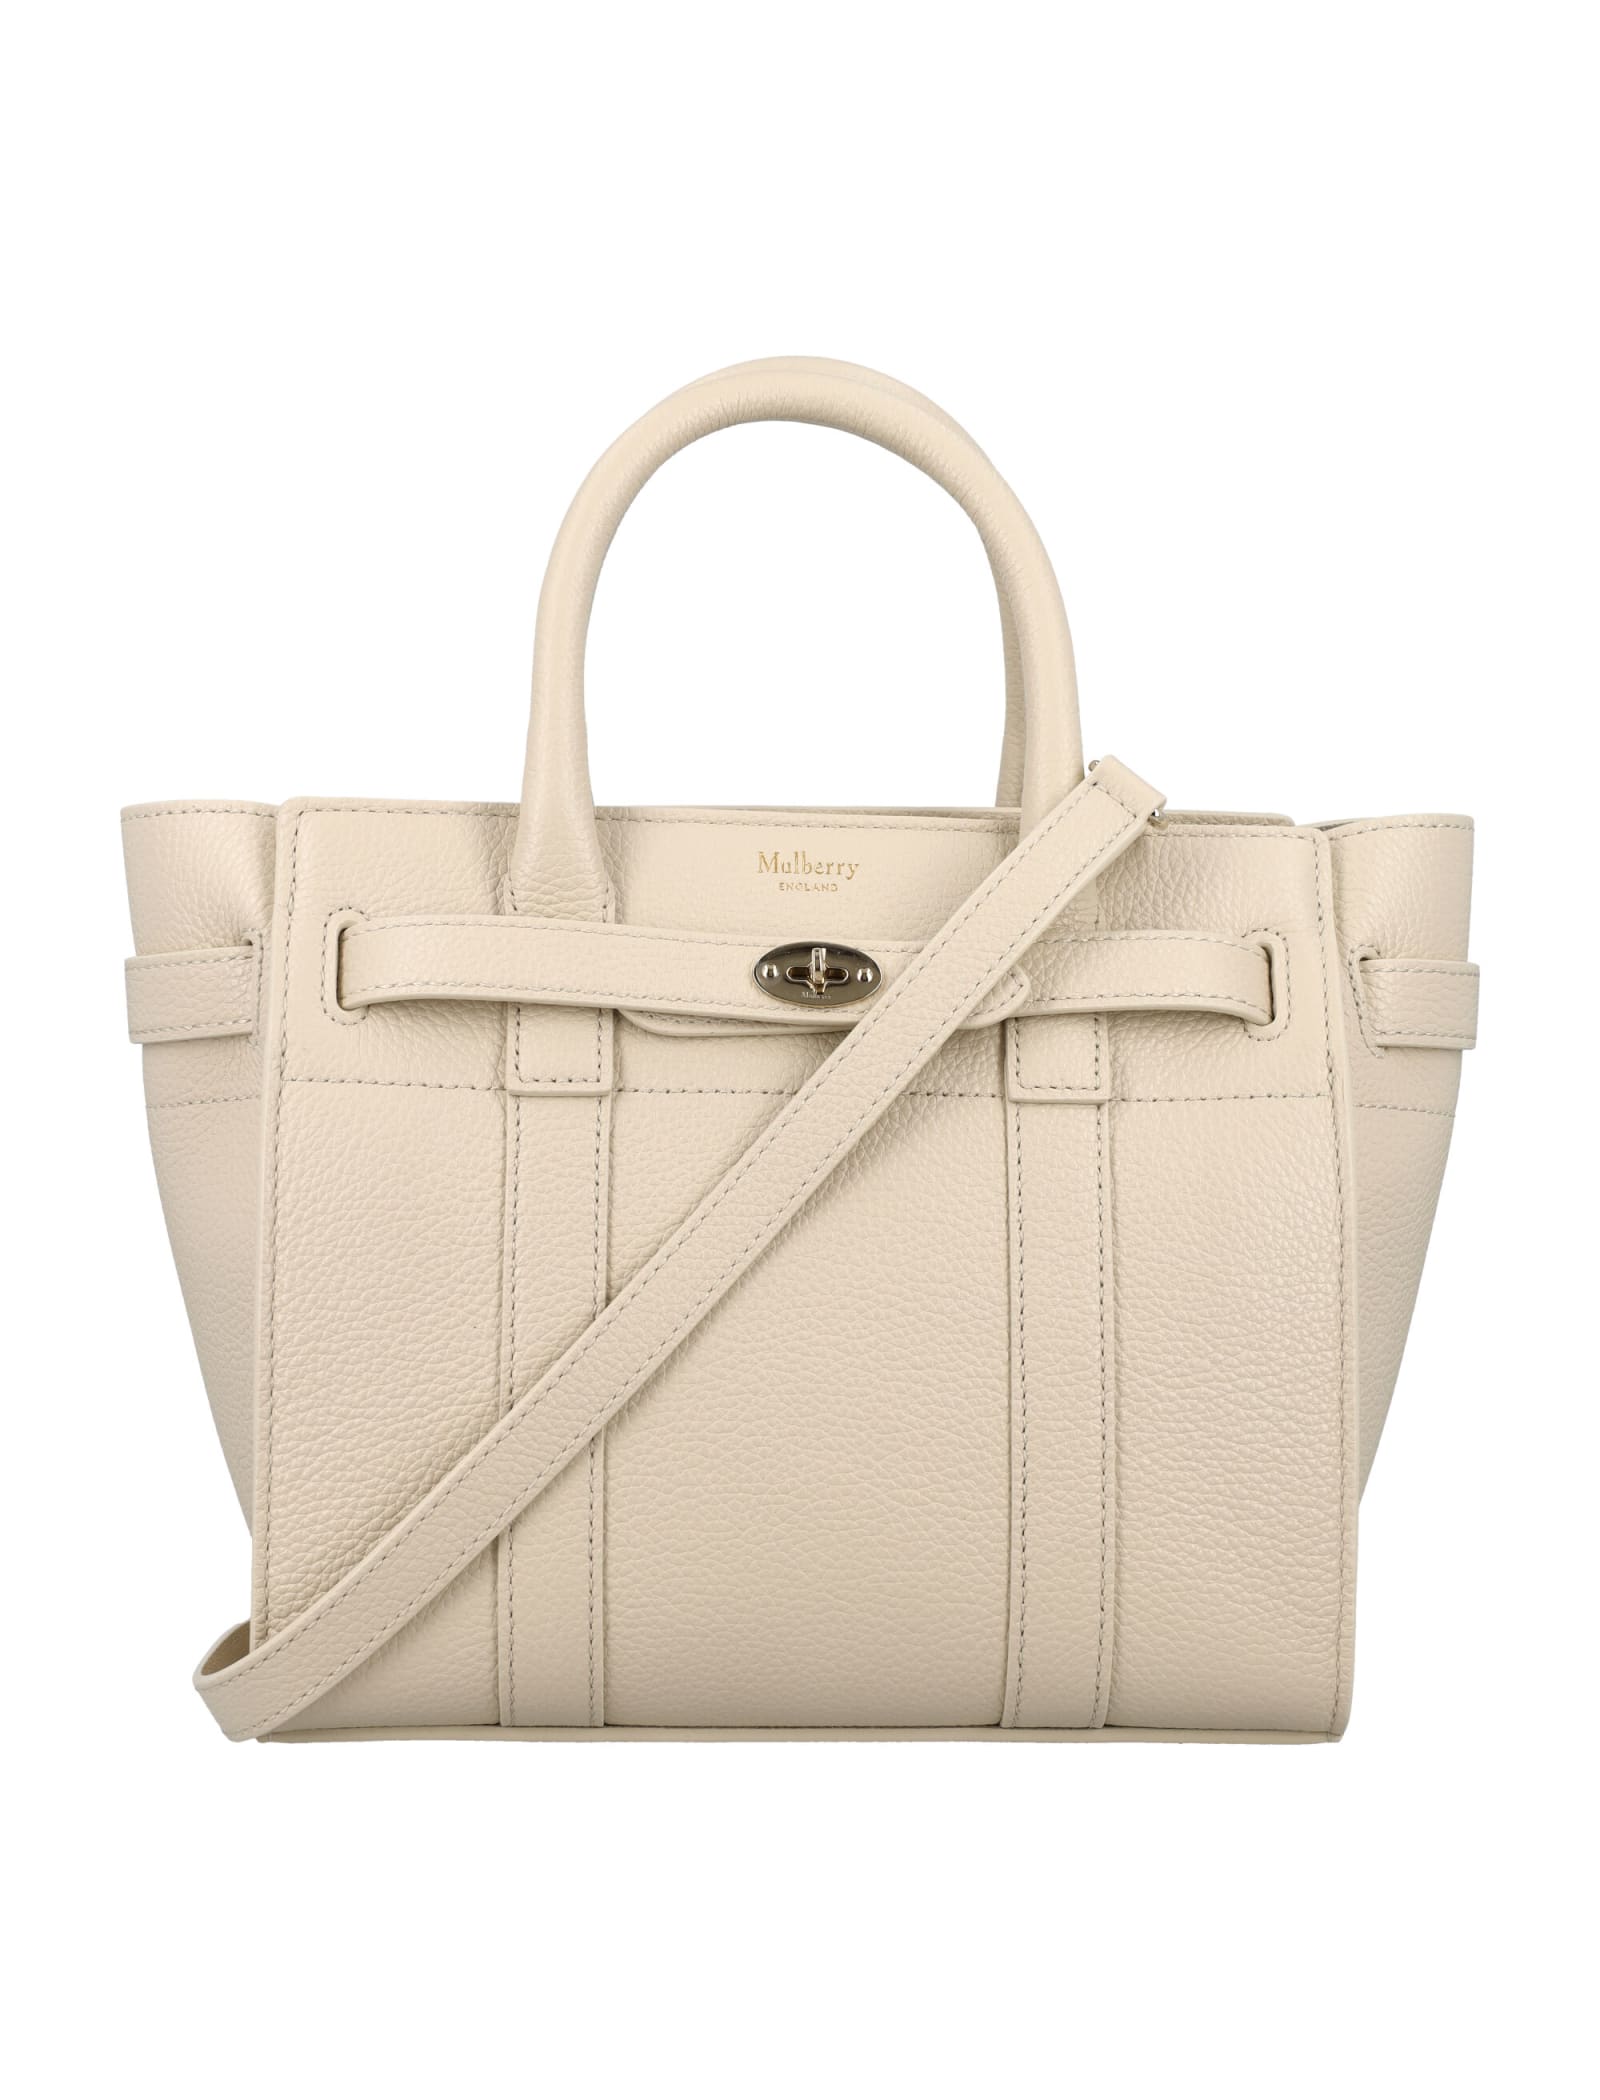 Mulberry Mini Zipped Bayswater Bag In Chalk